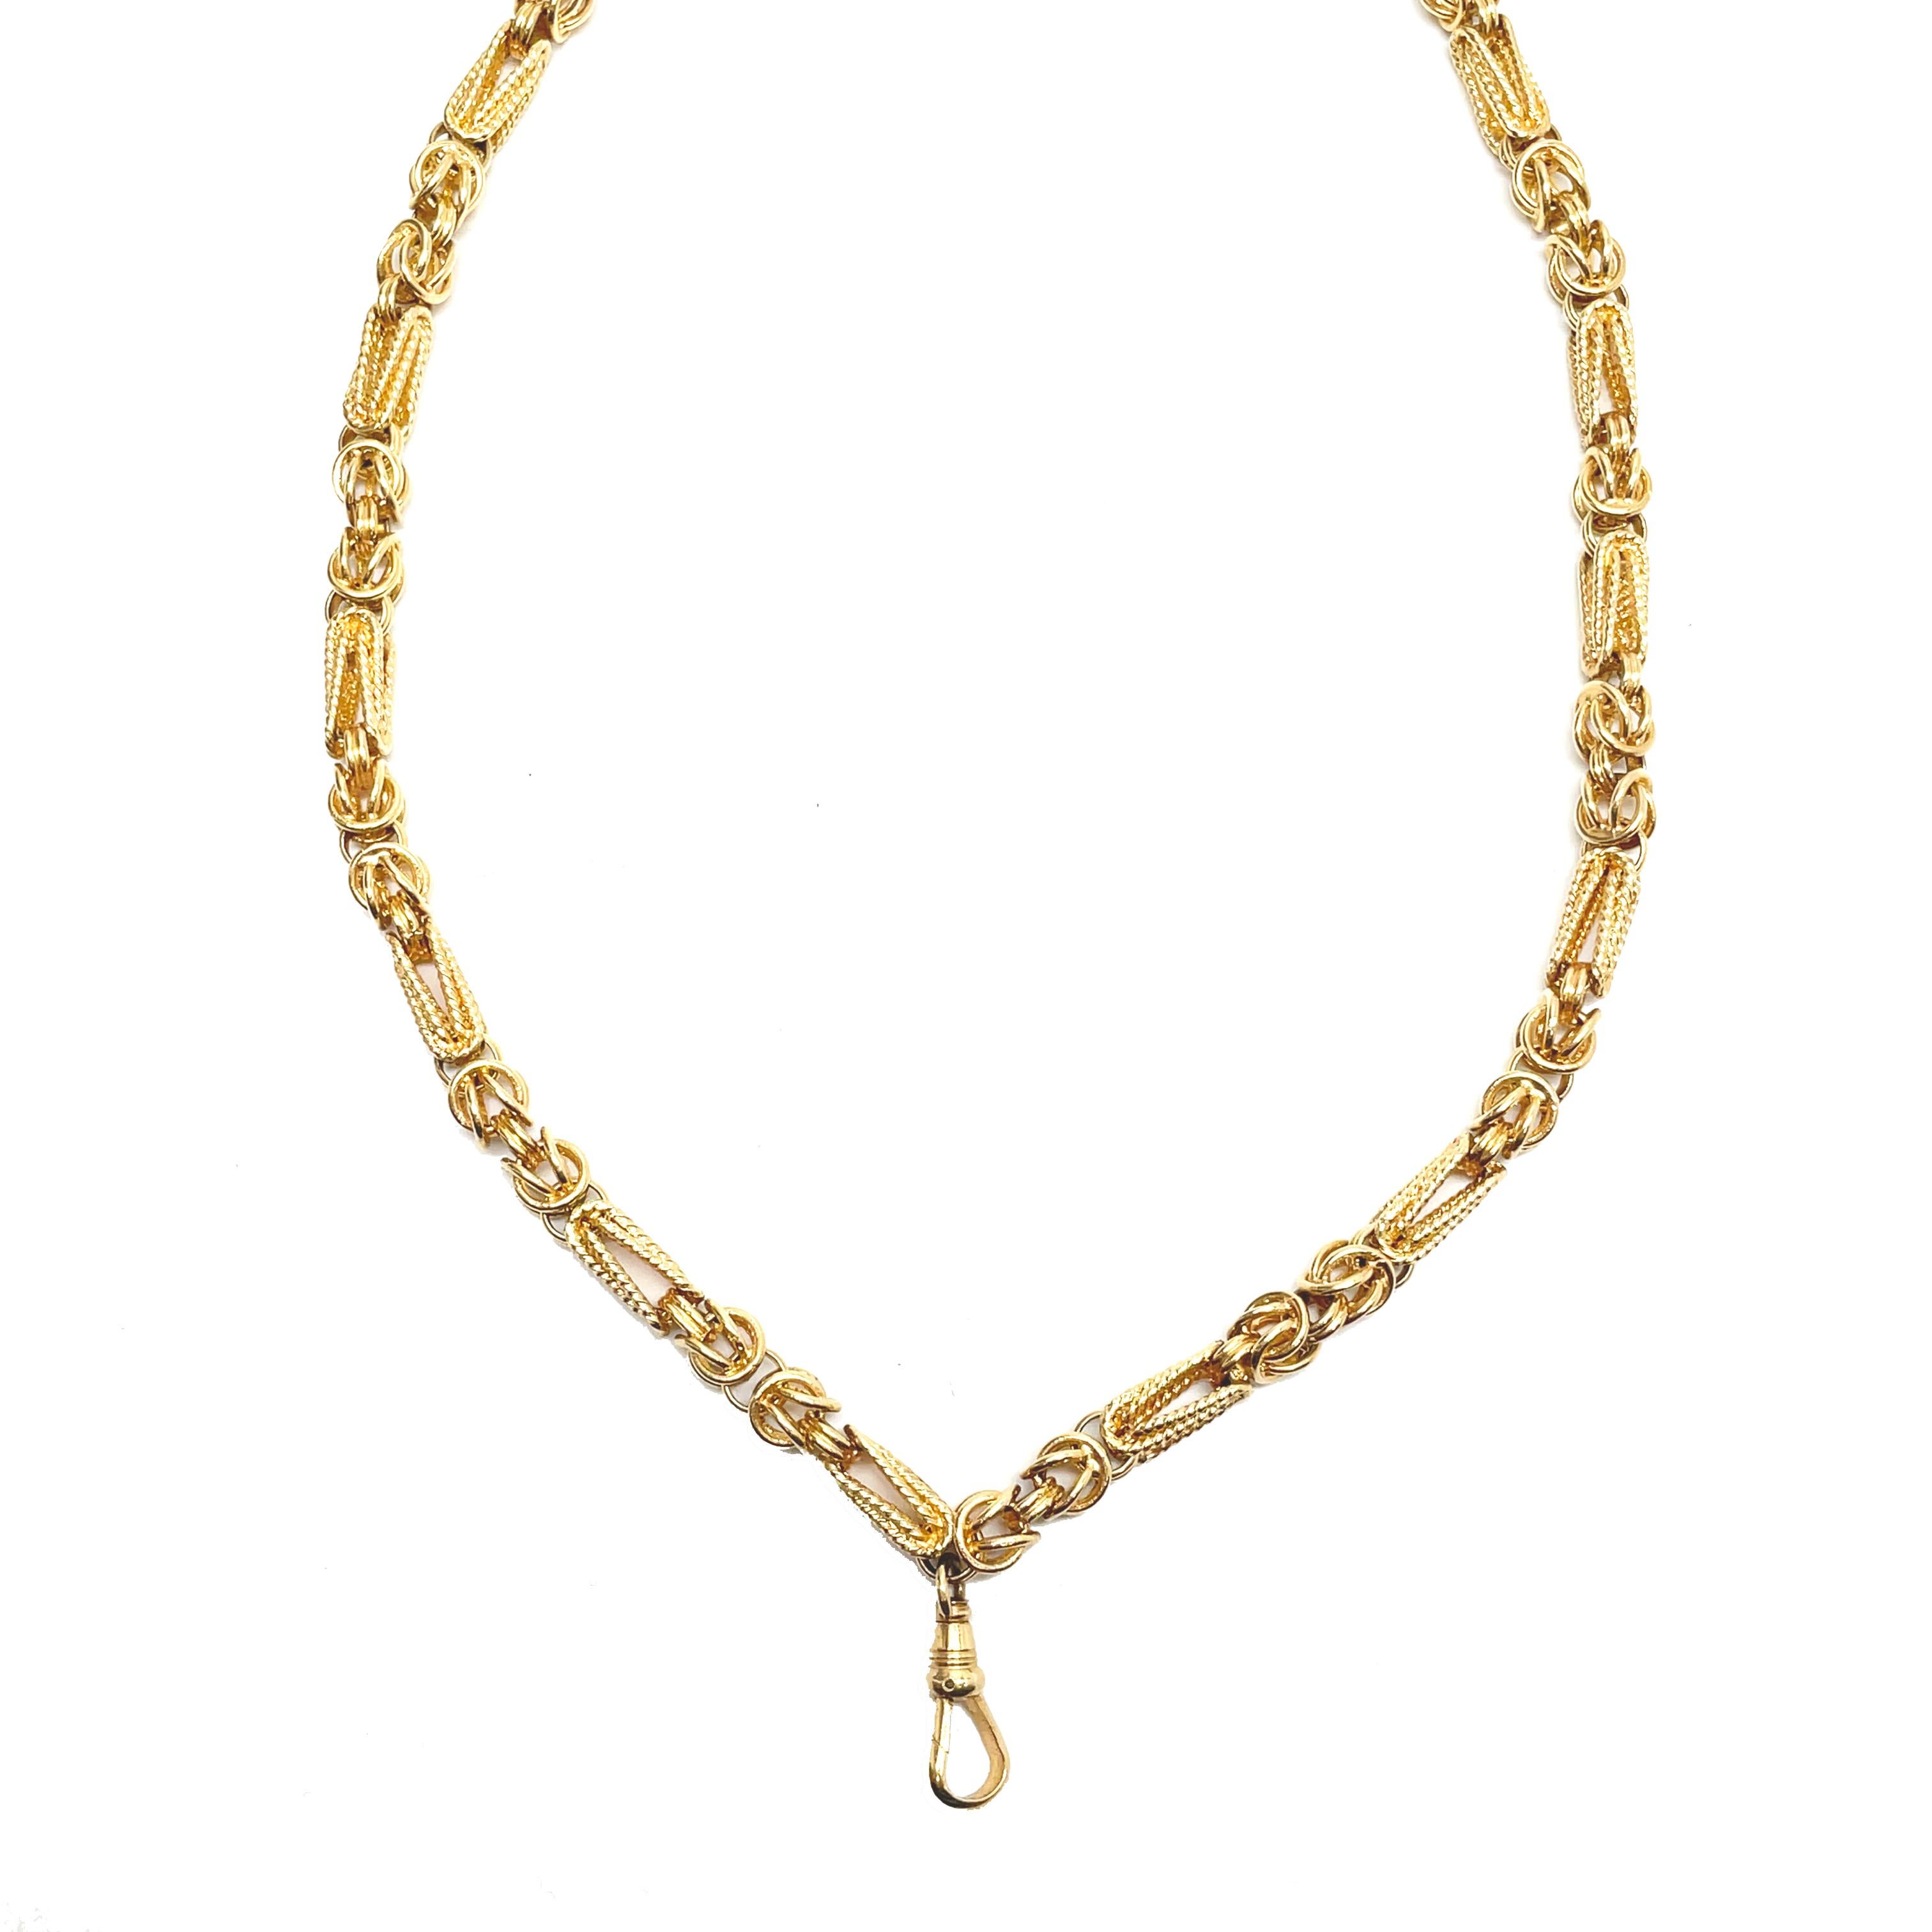 This is an exquisite hand-crafted chain composed of 14K yellow gold that dates back to the 1970s! This gorgeous chain was crafted by hand and features a gorgeous twisted and interlocking metal design which creates a unique texture to the chain. The